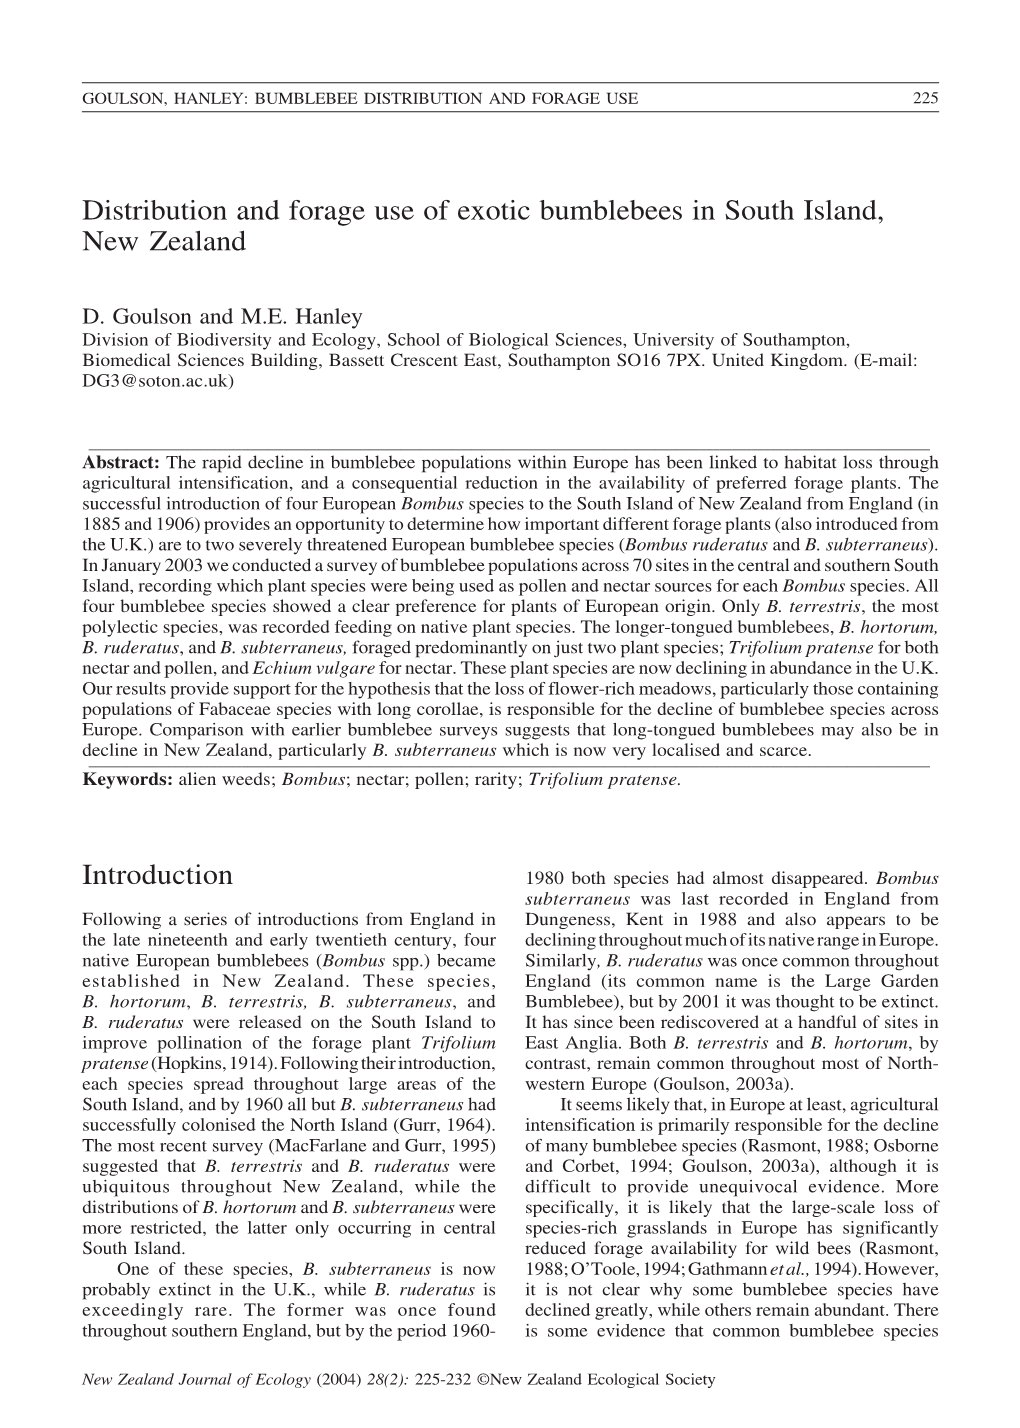 Distribution and Forage Use of Exotic Bumblebees in South Island, New Zealand